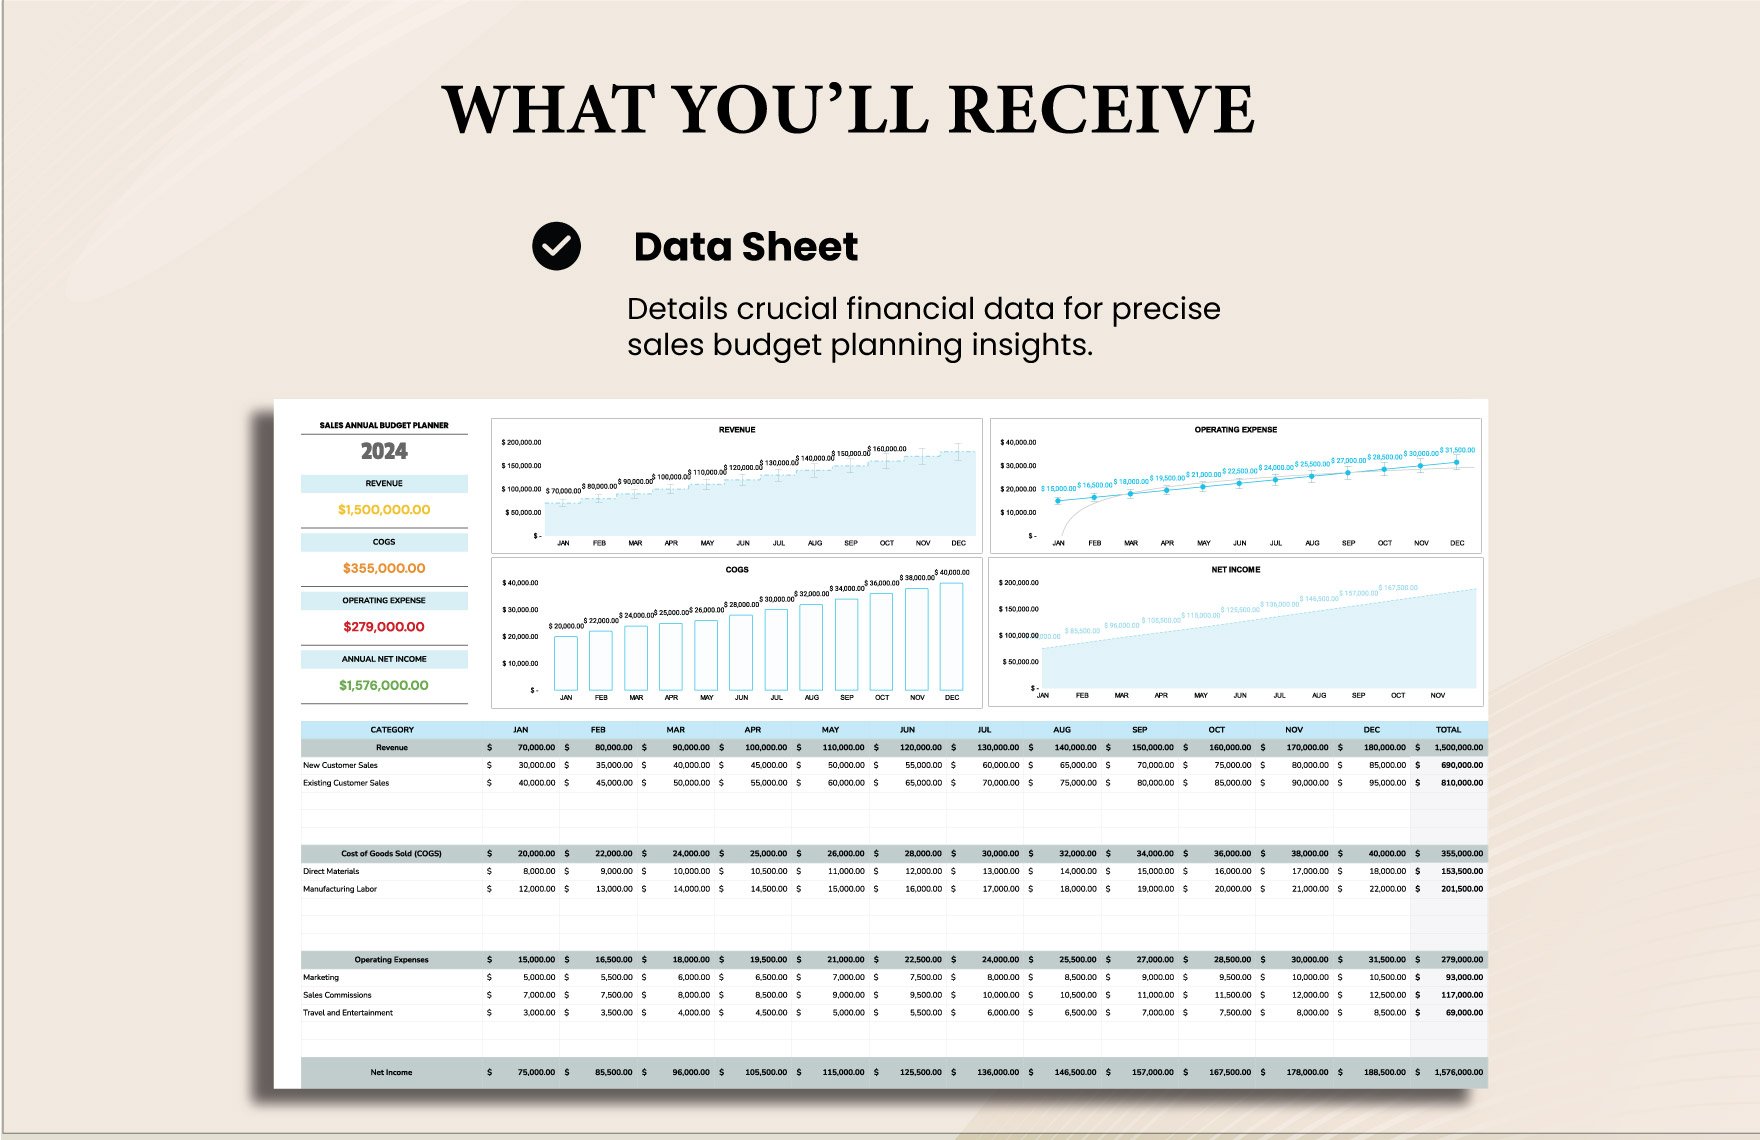 Sales Annual Budget Planner Template